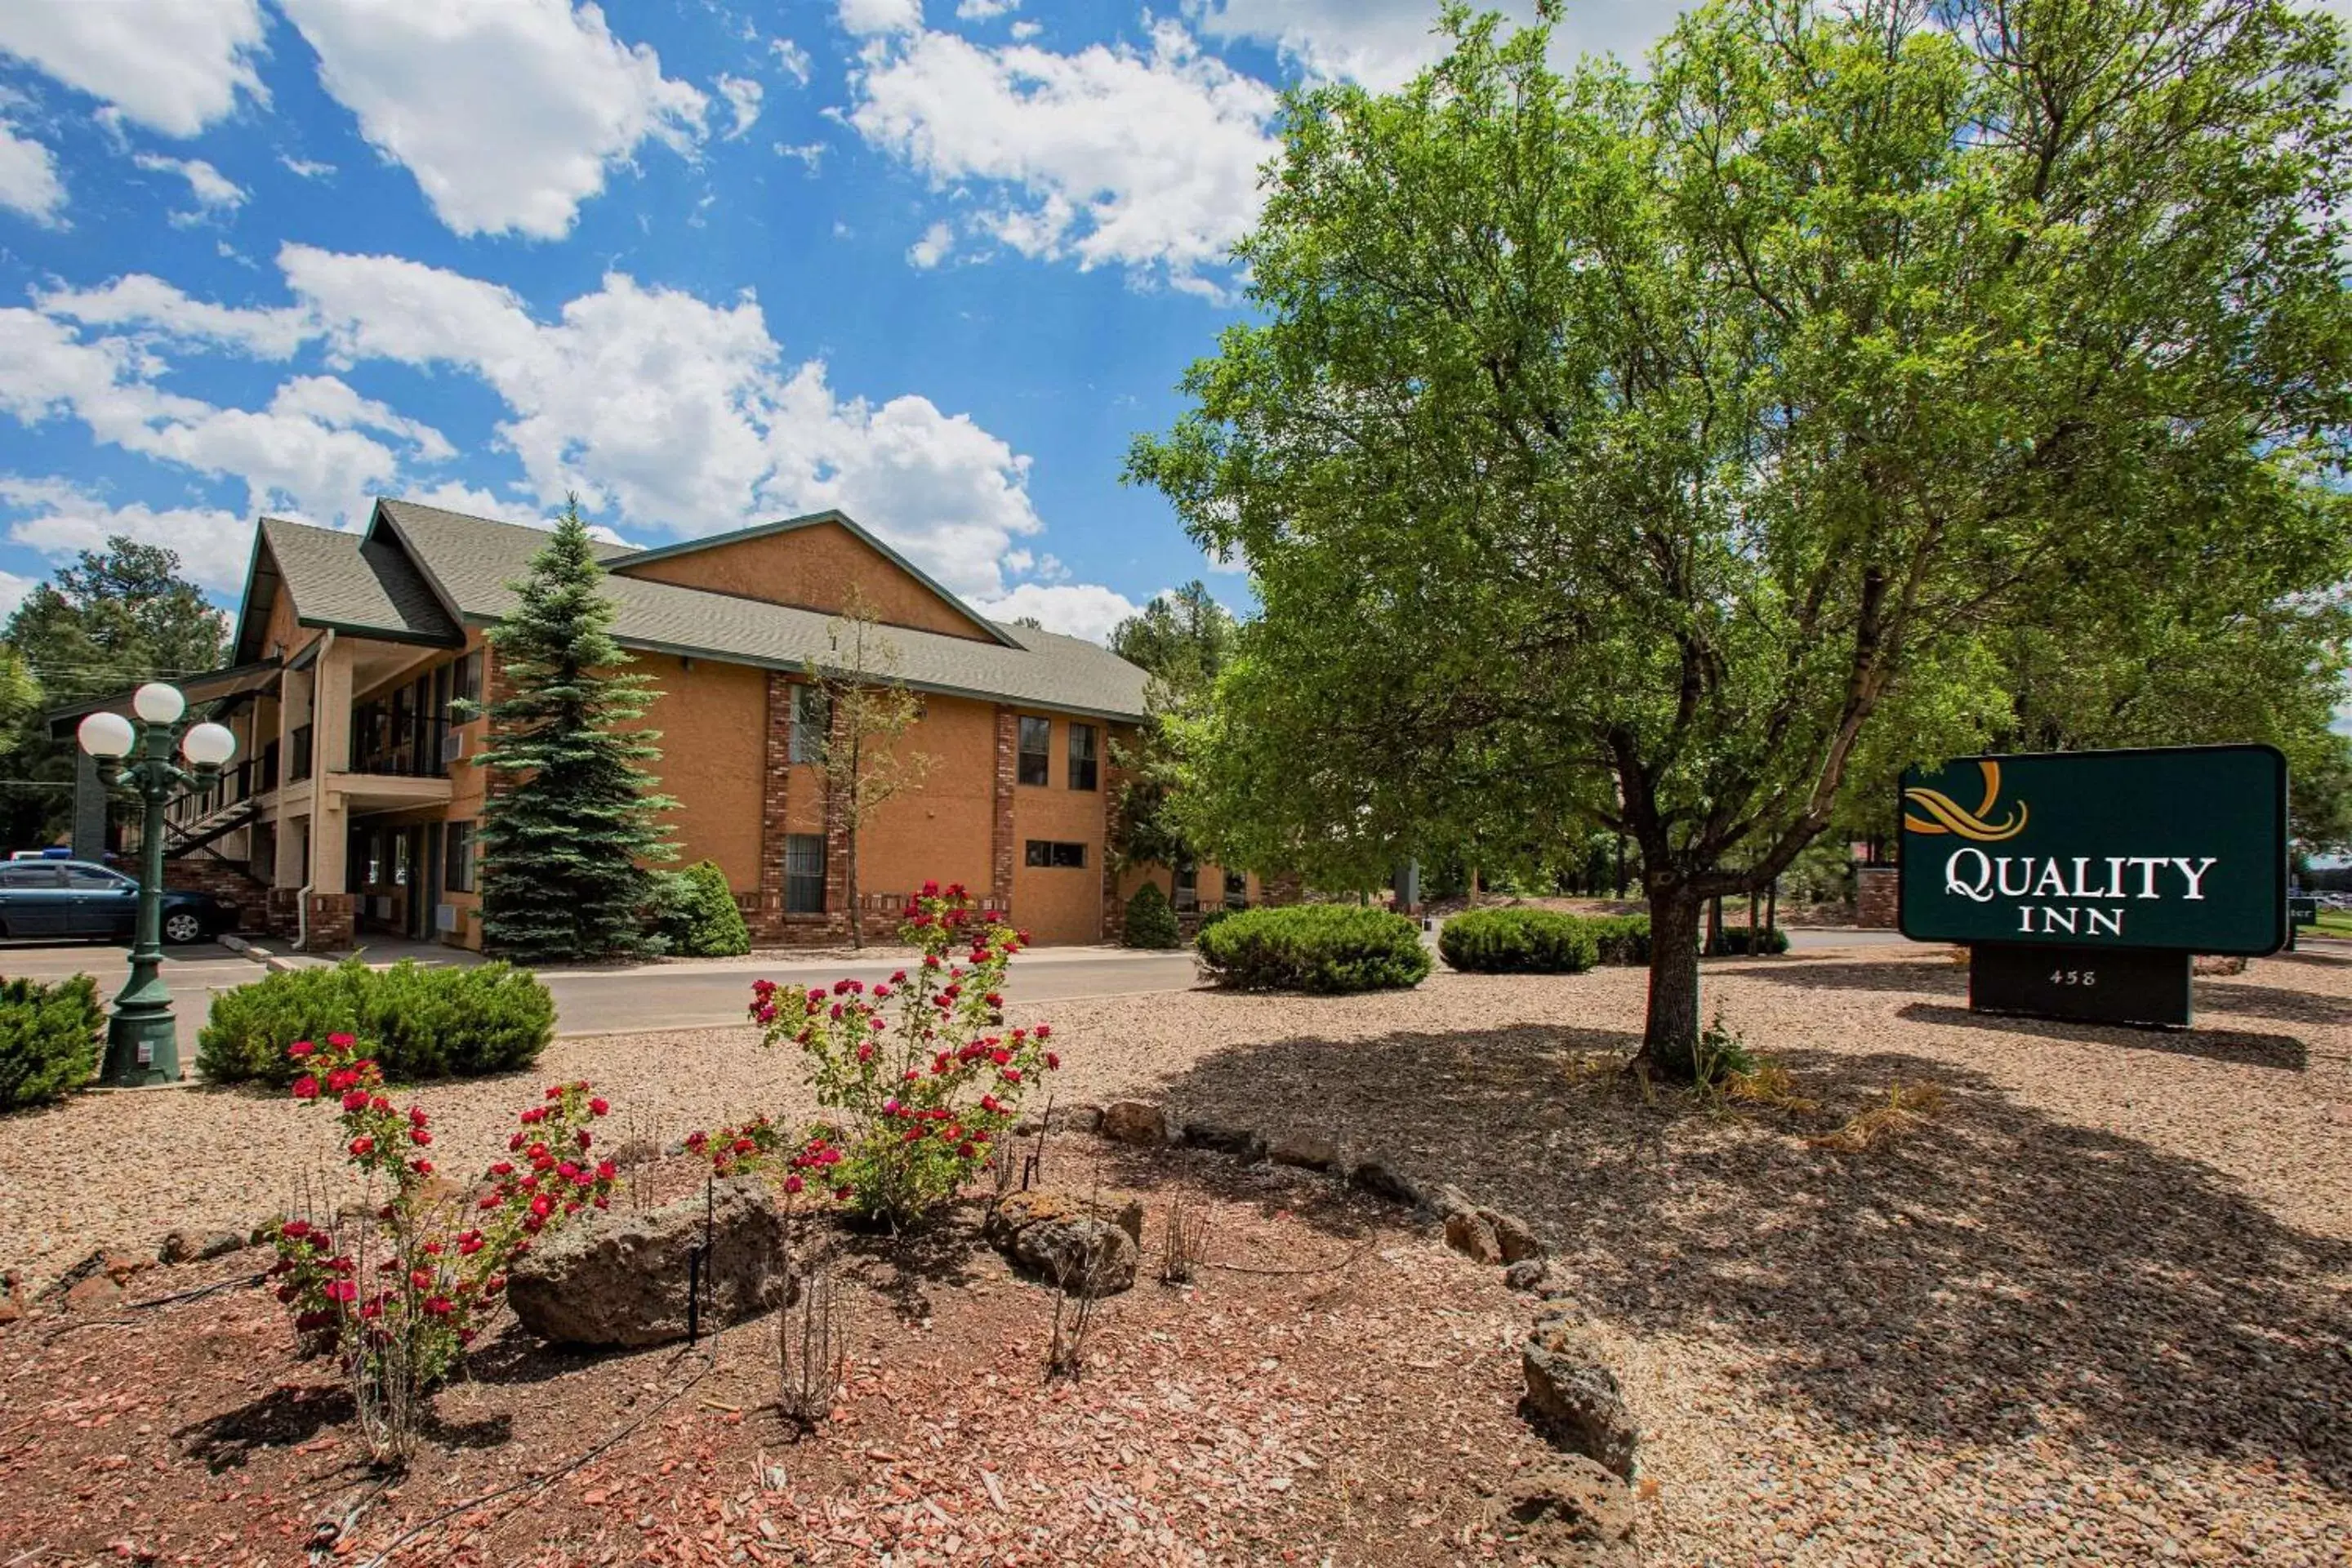 Property Building in Quality Inn Pinetop Lakeside